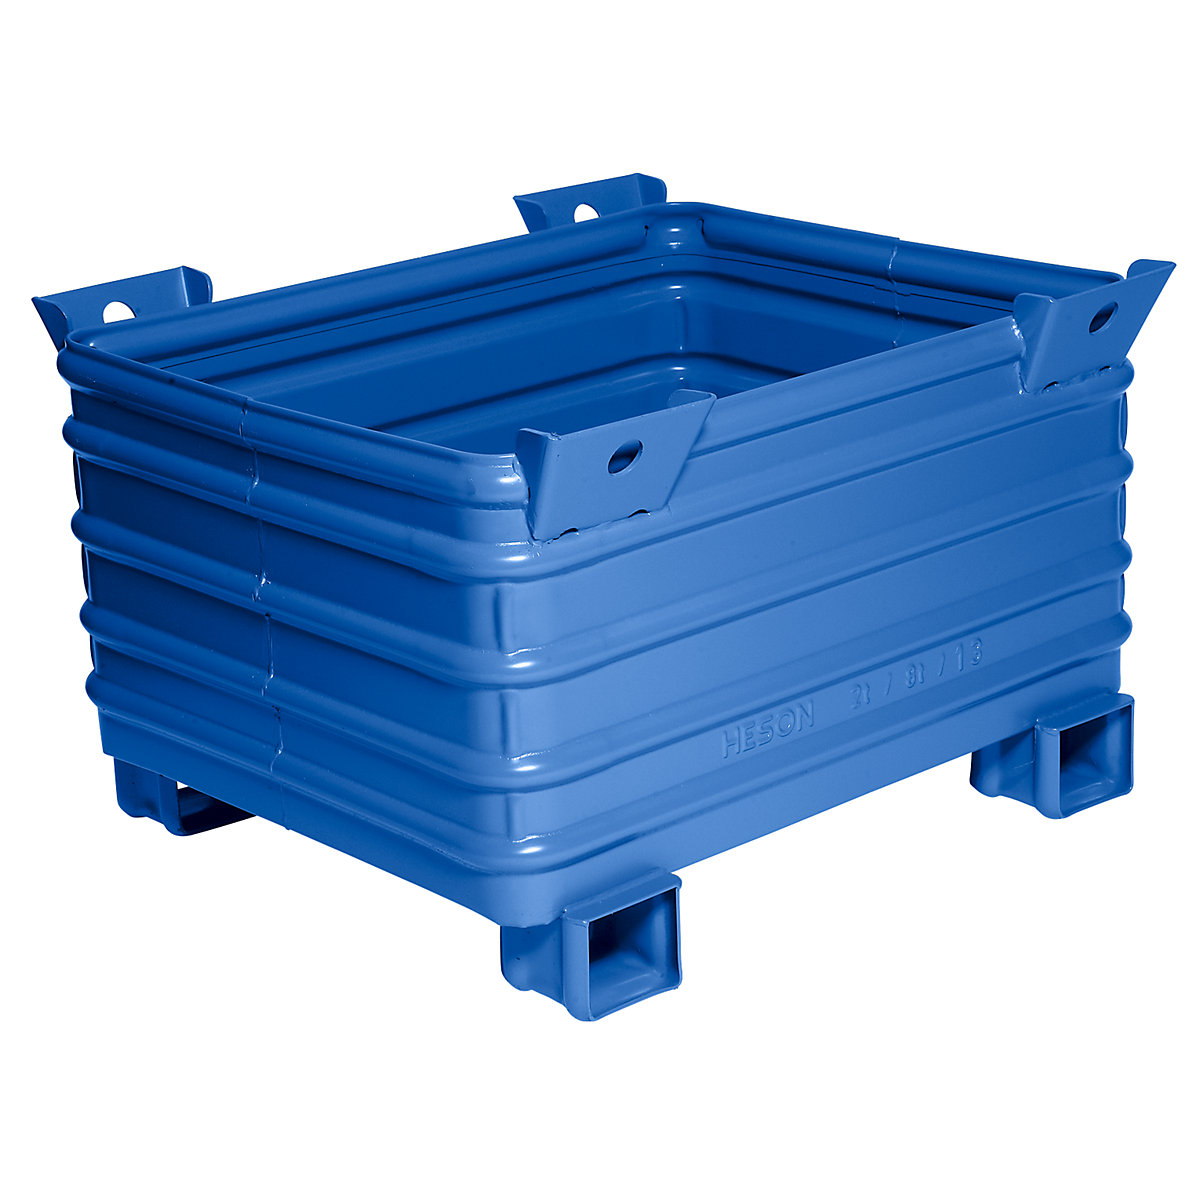 Heavy duty box pallet – Heson, WxL 800 x 1000 mm, with U-shaped feet, painted blue, 1+ items-5